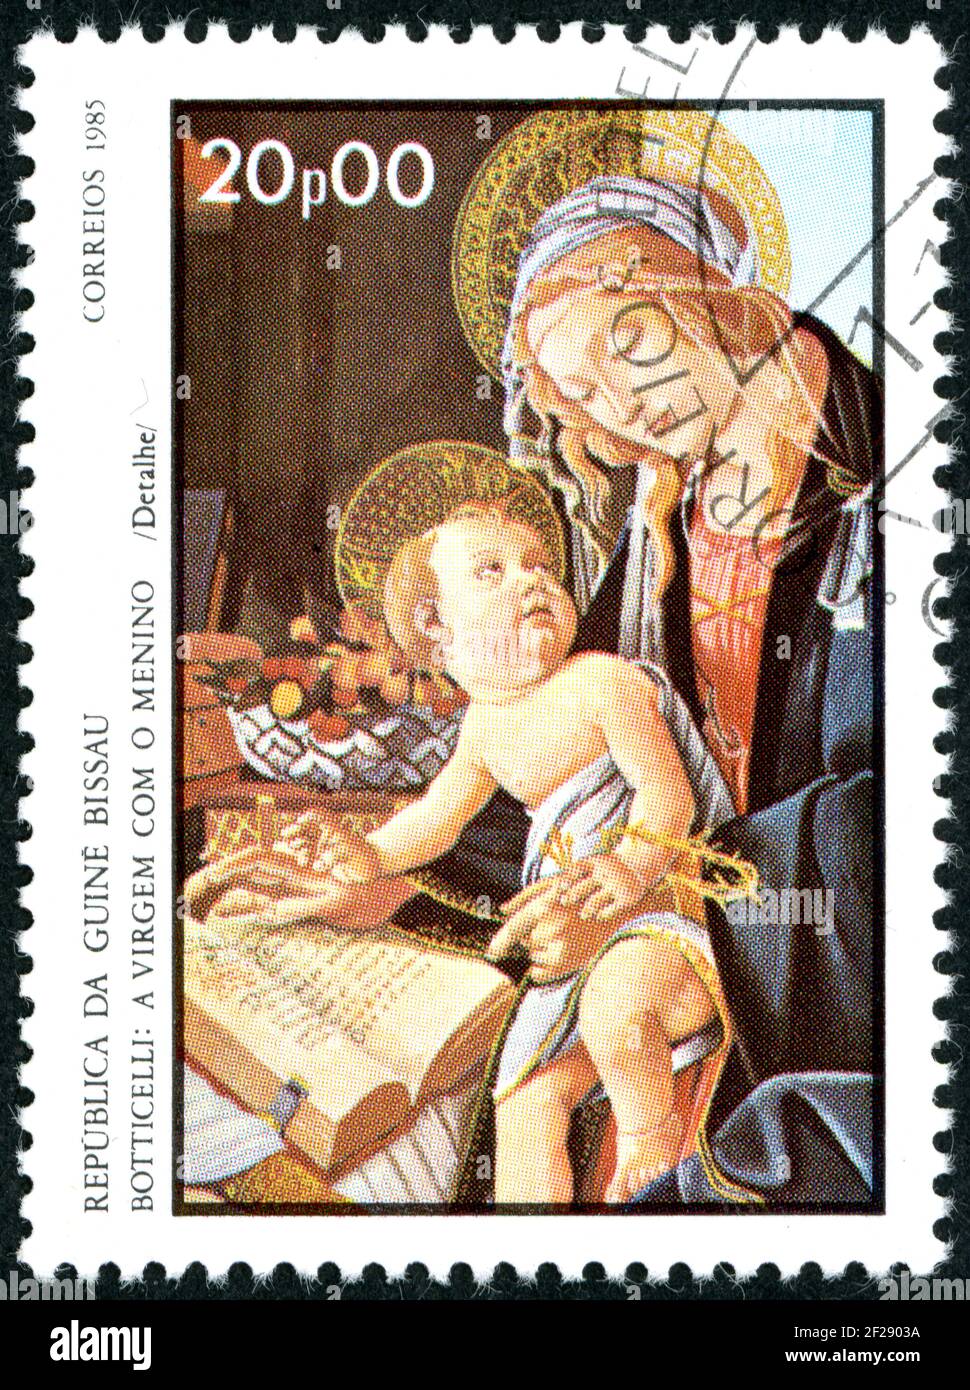 GUINEA-BISSAU - CIRCA 1985: A stamp printed in Guinea-Bissau, shown the painting by Botticelli (detail) - Virgin and Child, circa 1985 Stock Photo